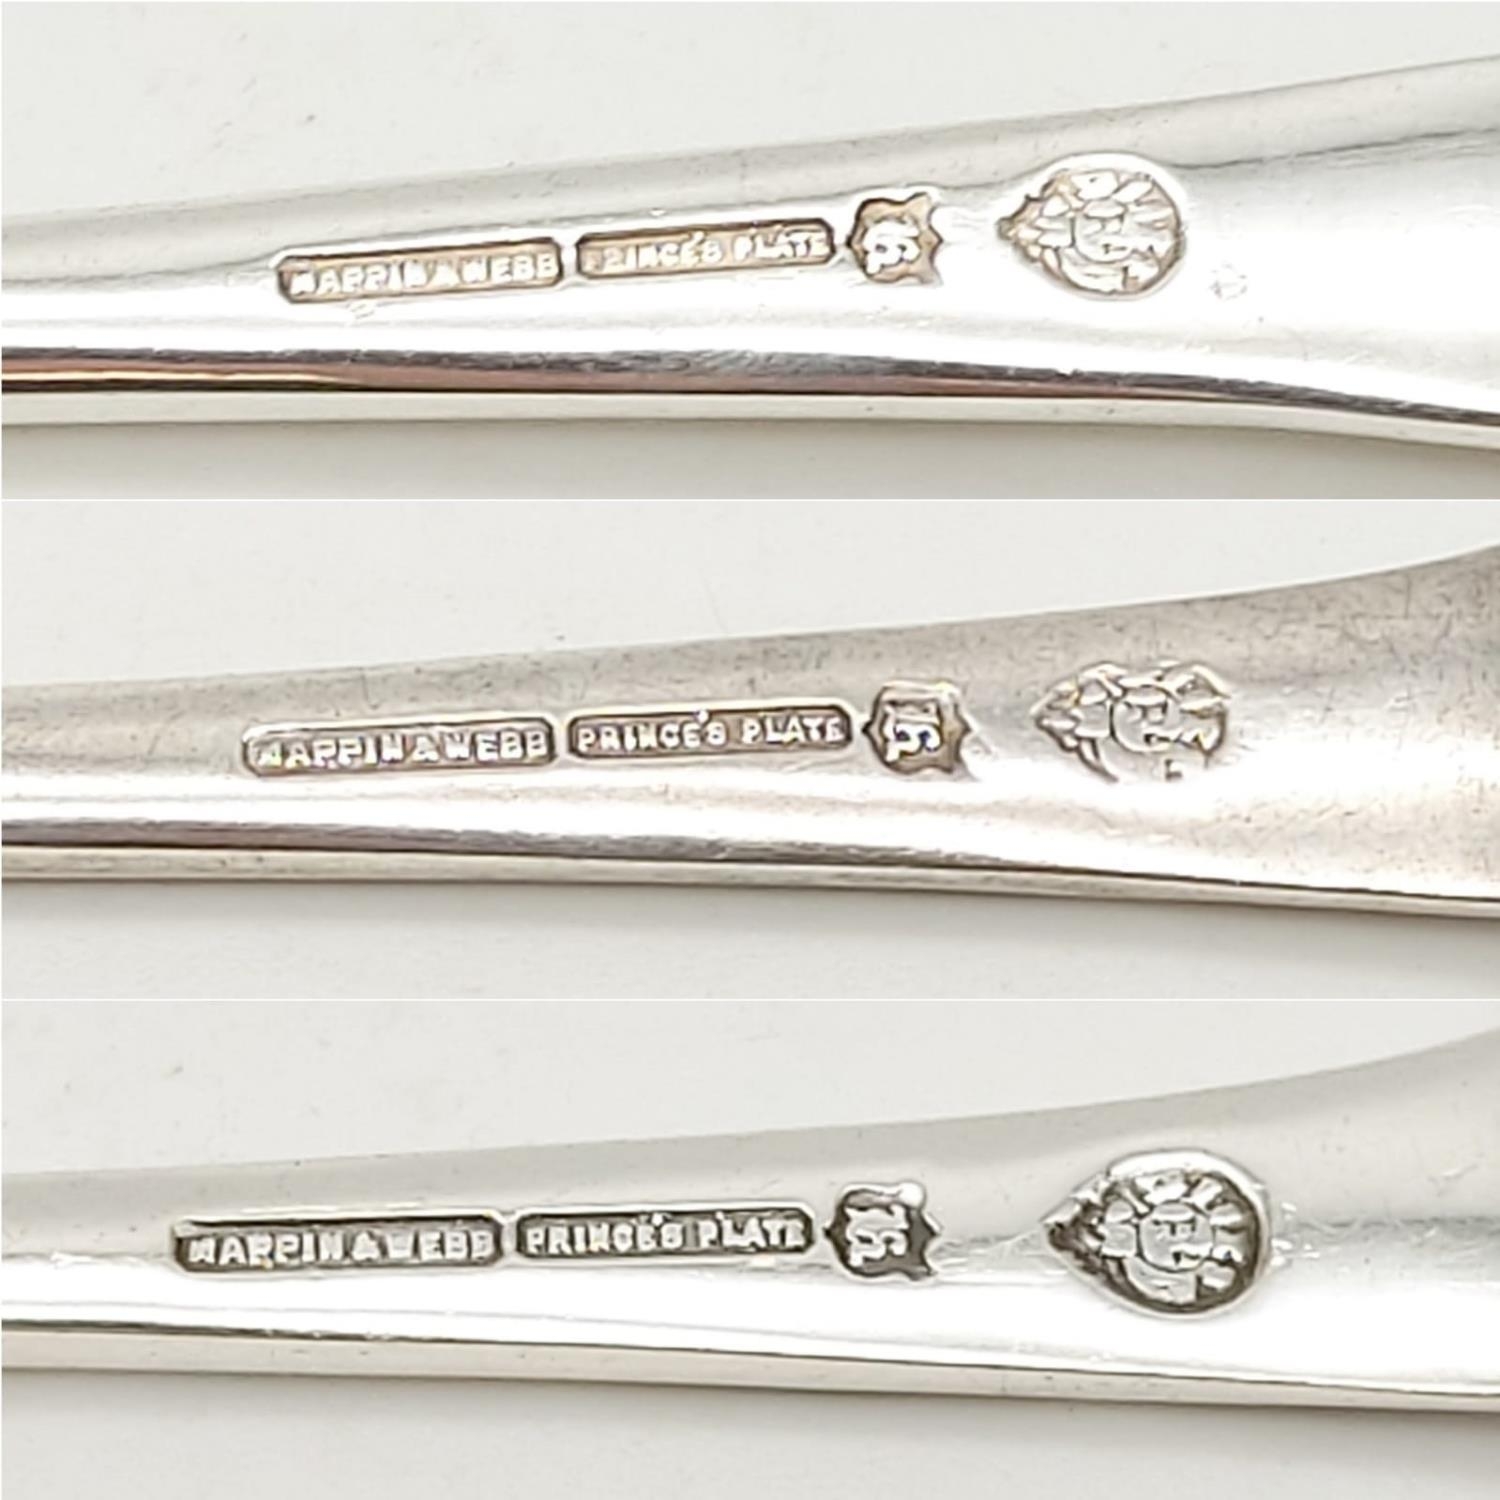 A Vintage Mappin and Webb Fish Entrée Cutlery Set. Prince's Silver plate with engraved decoration. - Image 12 of 16